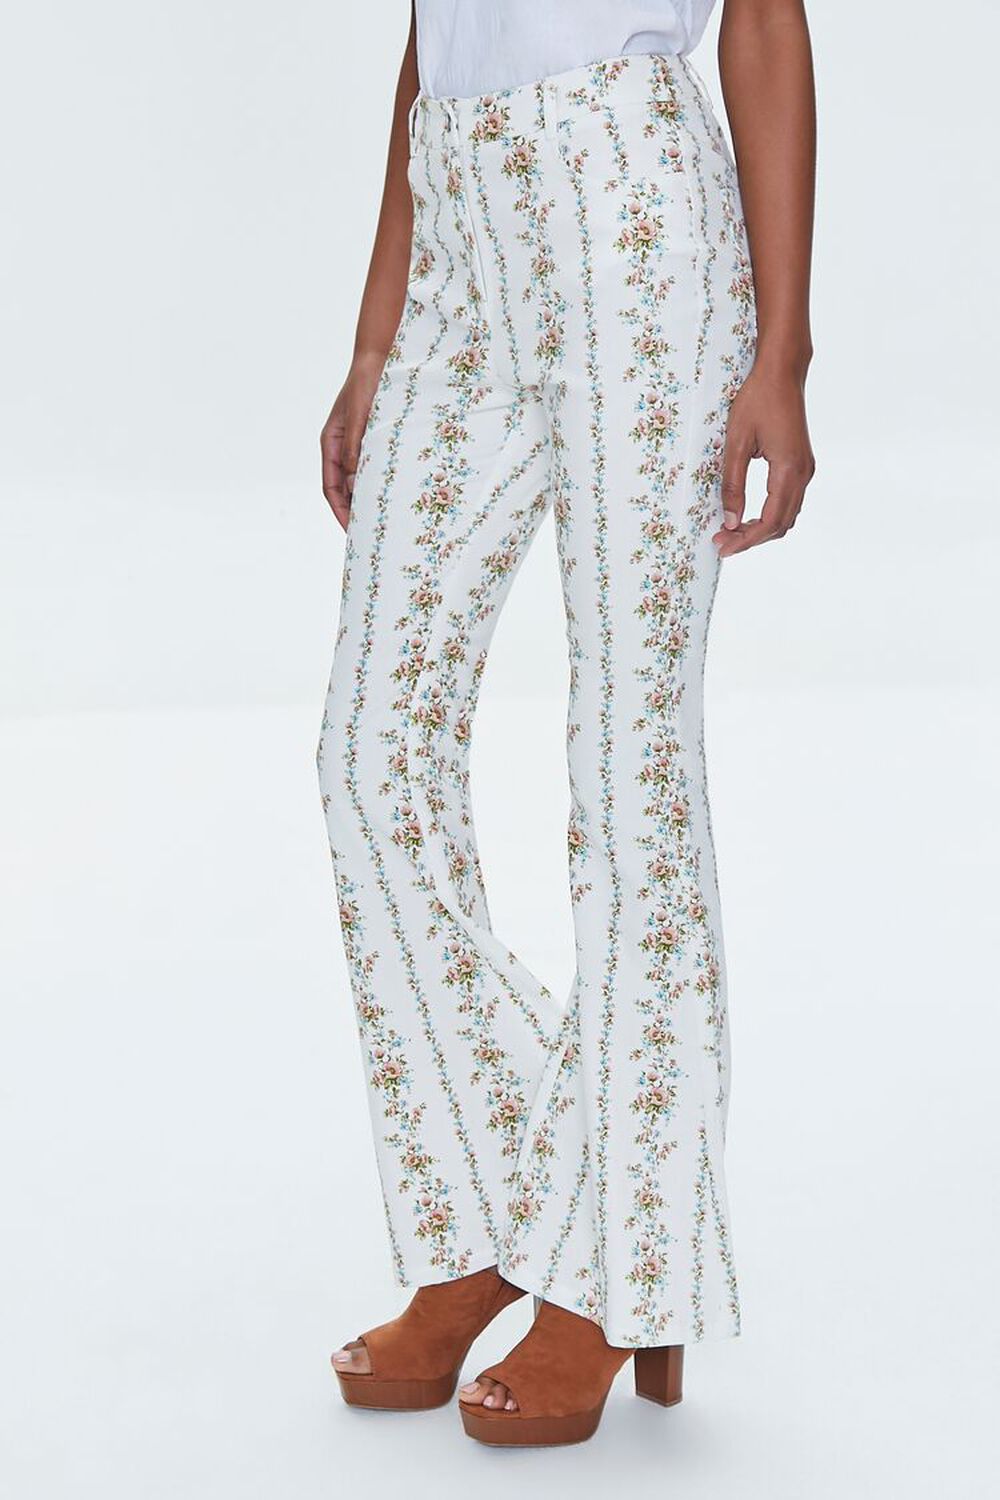 WHITE/MULTI Floral Print High-Rise Flare Pants, image 3